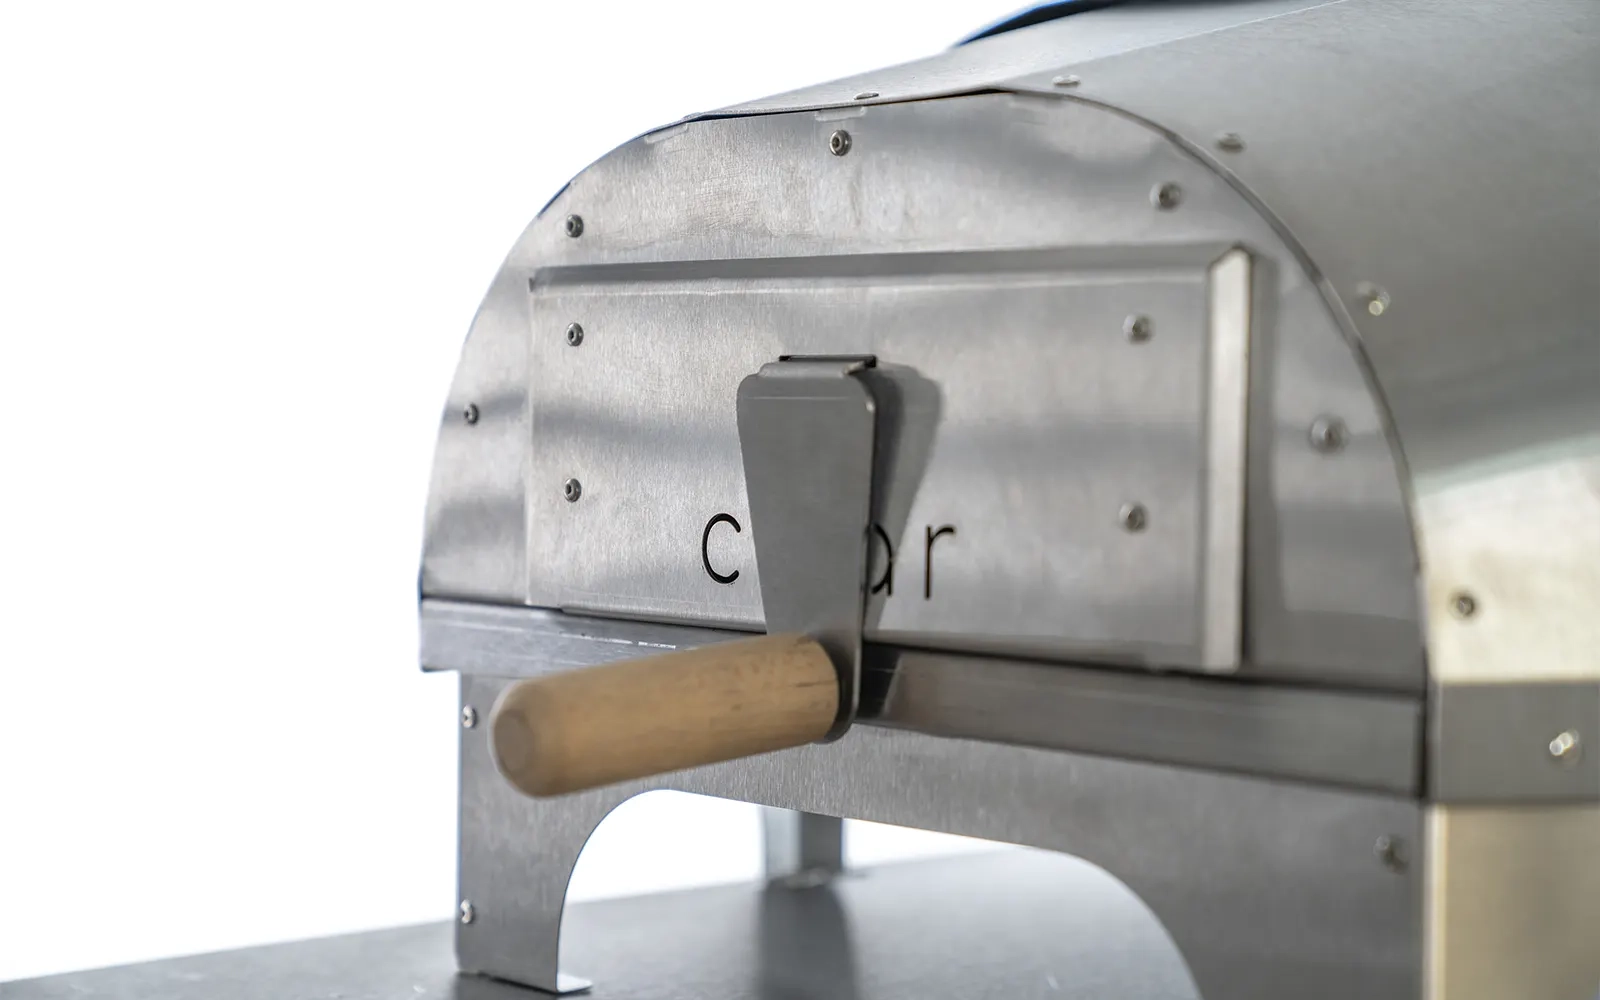 Close-up of the rear of The No.16 pizza oven with the hopper closed against a white background